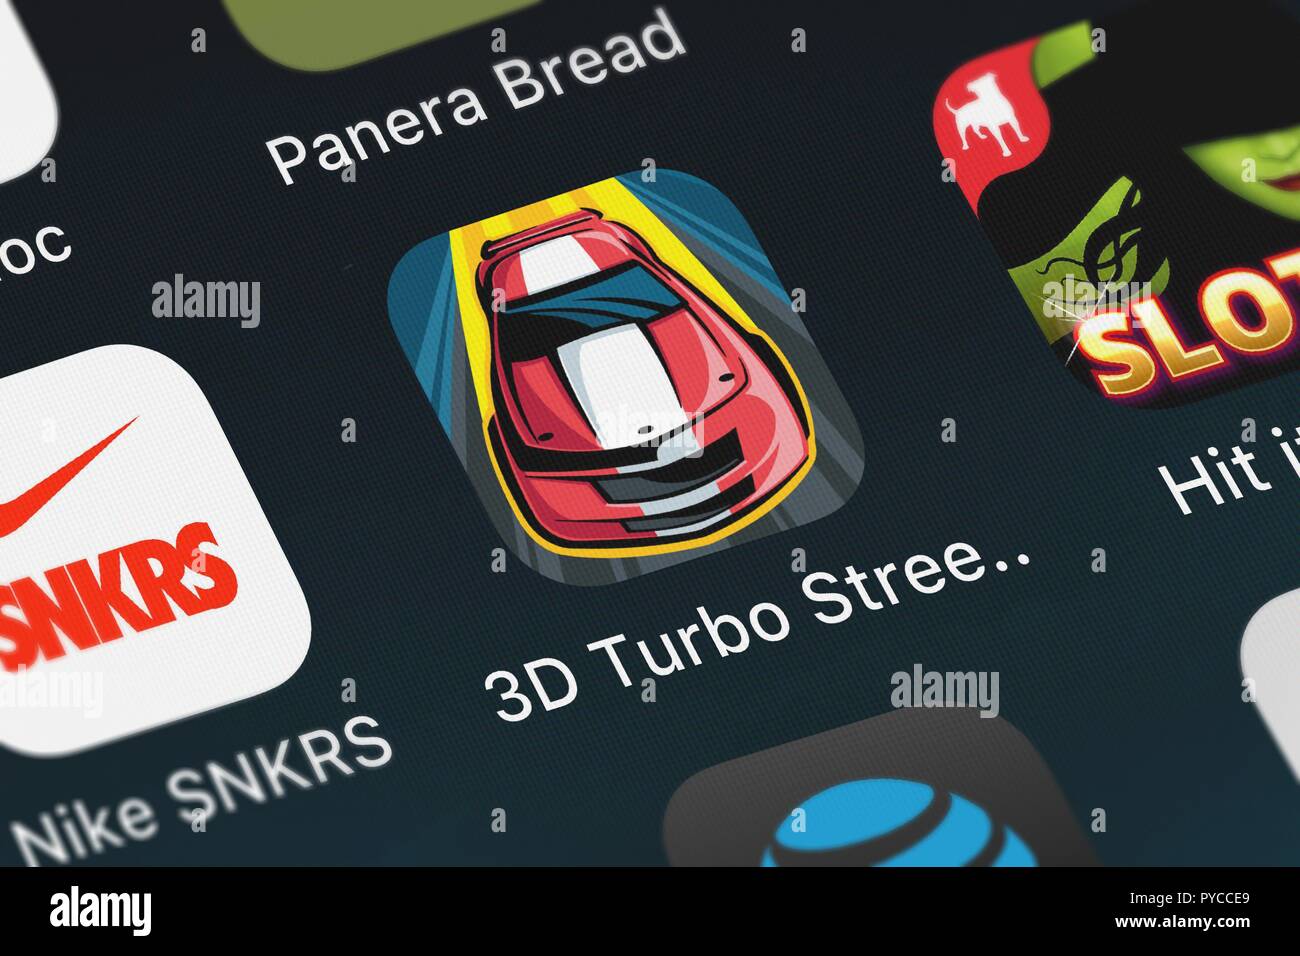 London, United Kingdom - October 26, 2018: Close-up shot of the 3D Turbo Street Racing Free application icon from uTappz Mobile Development LLC on an  Stock Photo